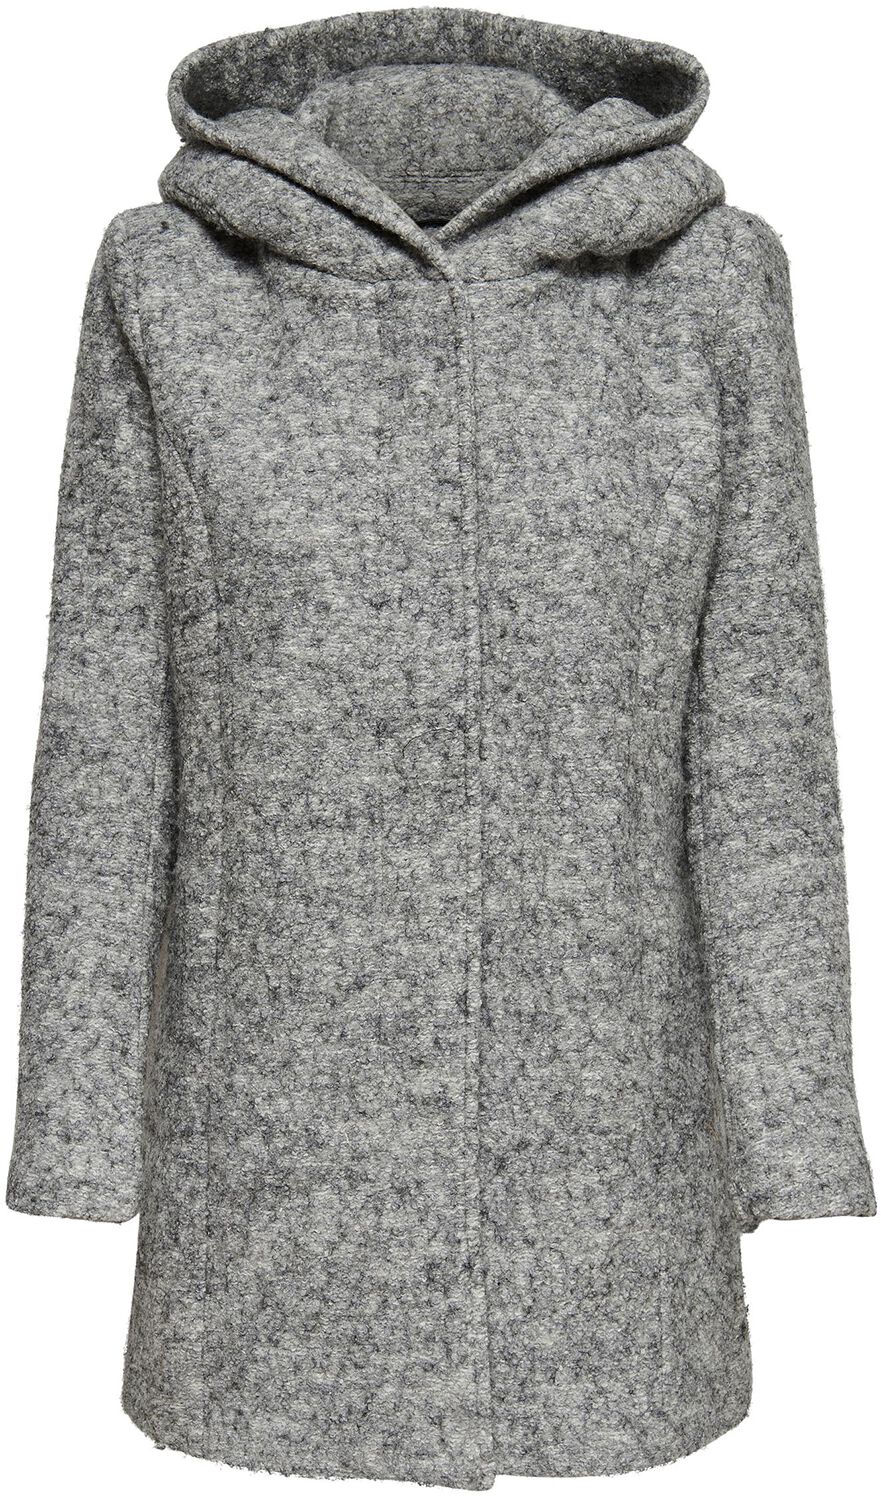 Image of Cappotti di Only - Sedona Boucle Wool Coat - XS a XL - Donna - grigio